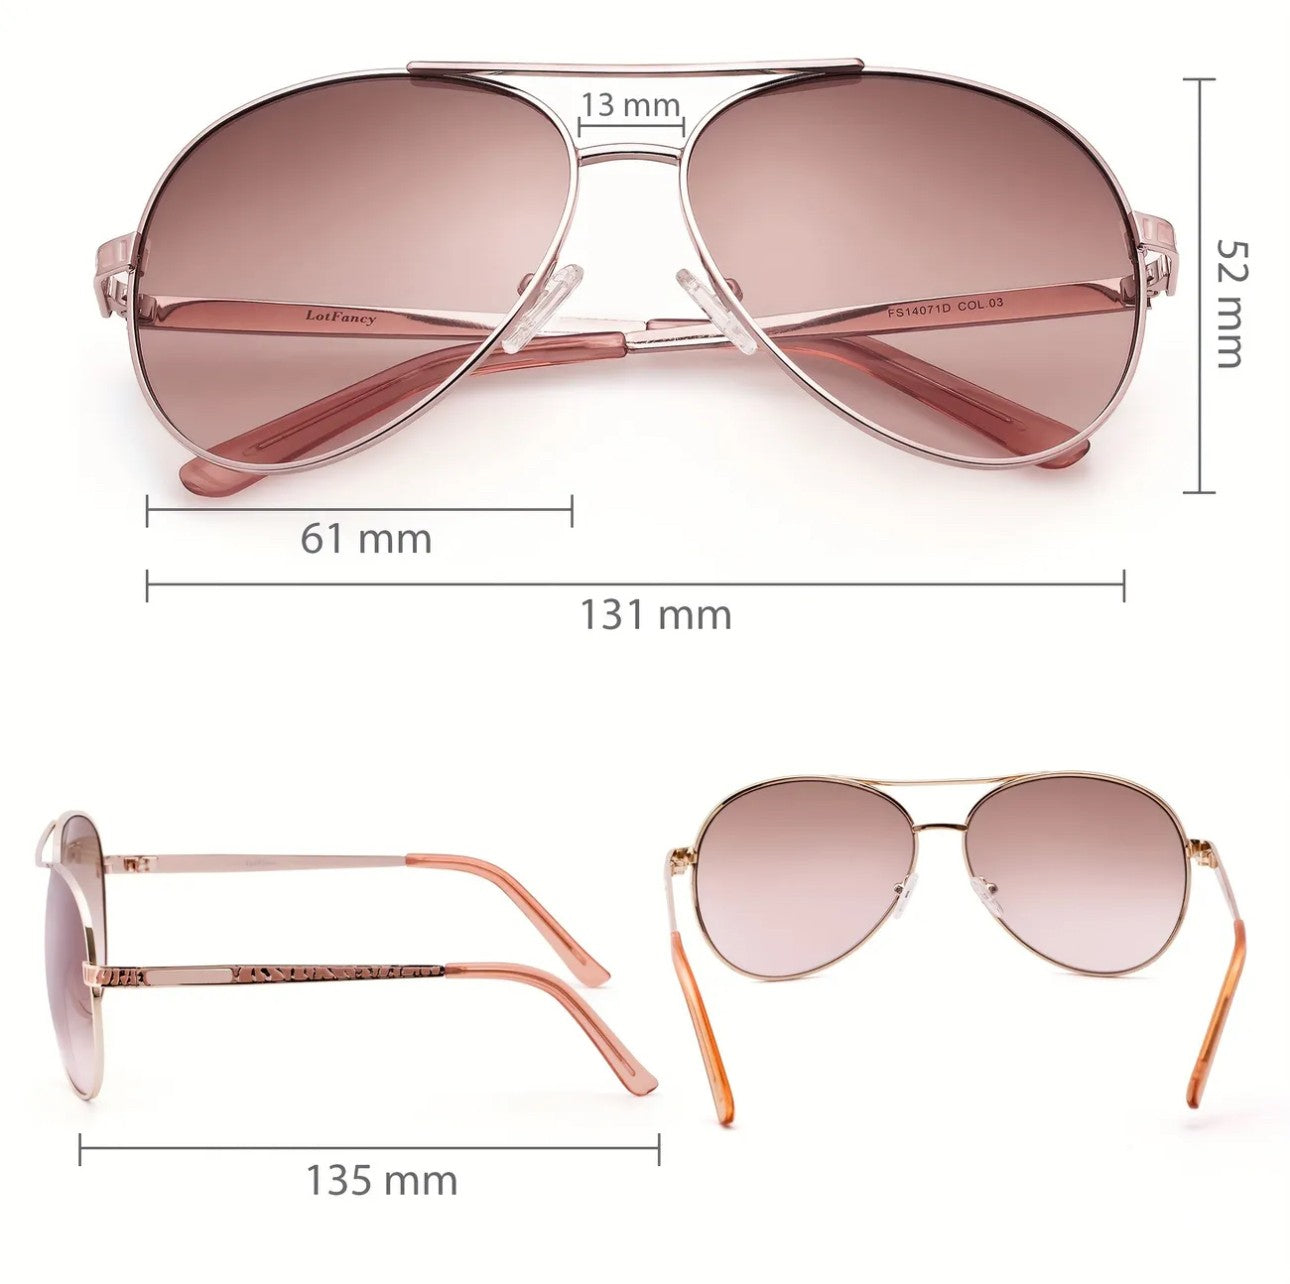 Elevate your style with Seven Sisters Rose Gold Aviator sunglasses. These UV 400 protected shades not only offer superior eye protection but also add a touch of glamour to any outfit. Easy to clean and ultra-fashionable, these sunglasses are a must-have accessory for every fashion-forward individual. Shop now and step out in style with Seven Sisters Rose Gold Aviator sunglasses.